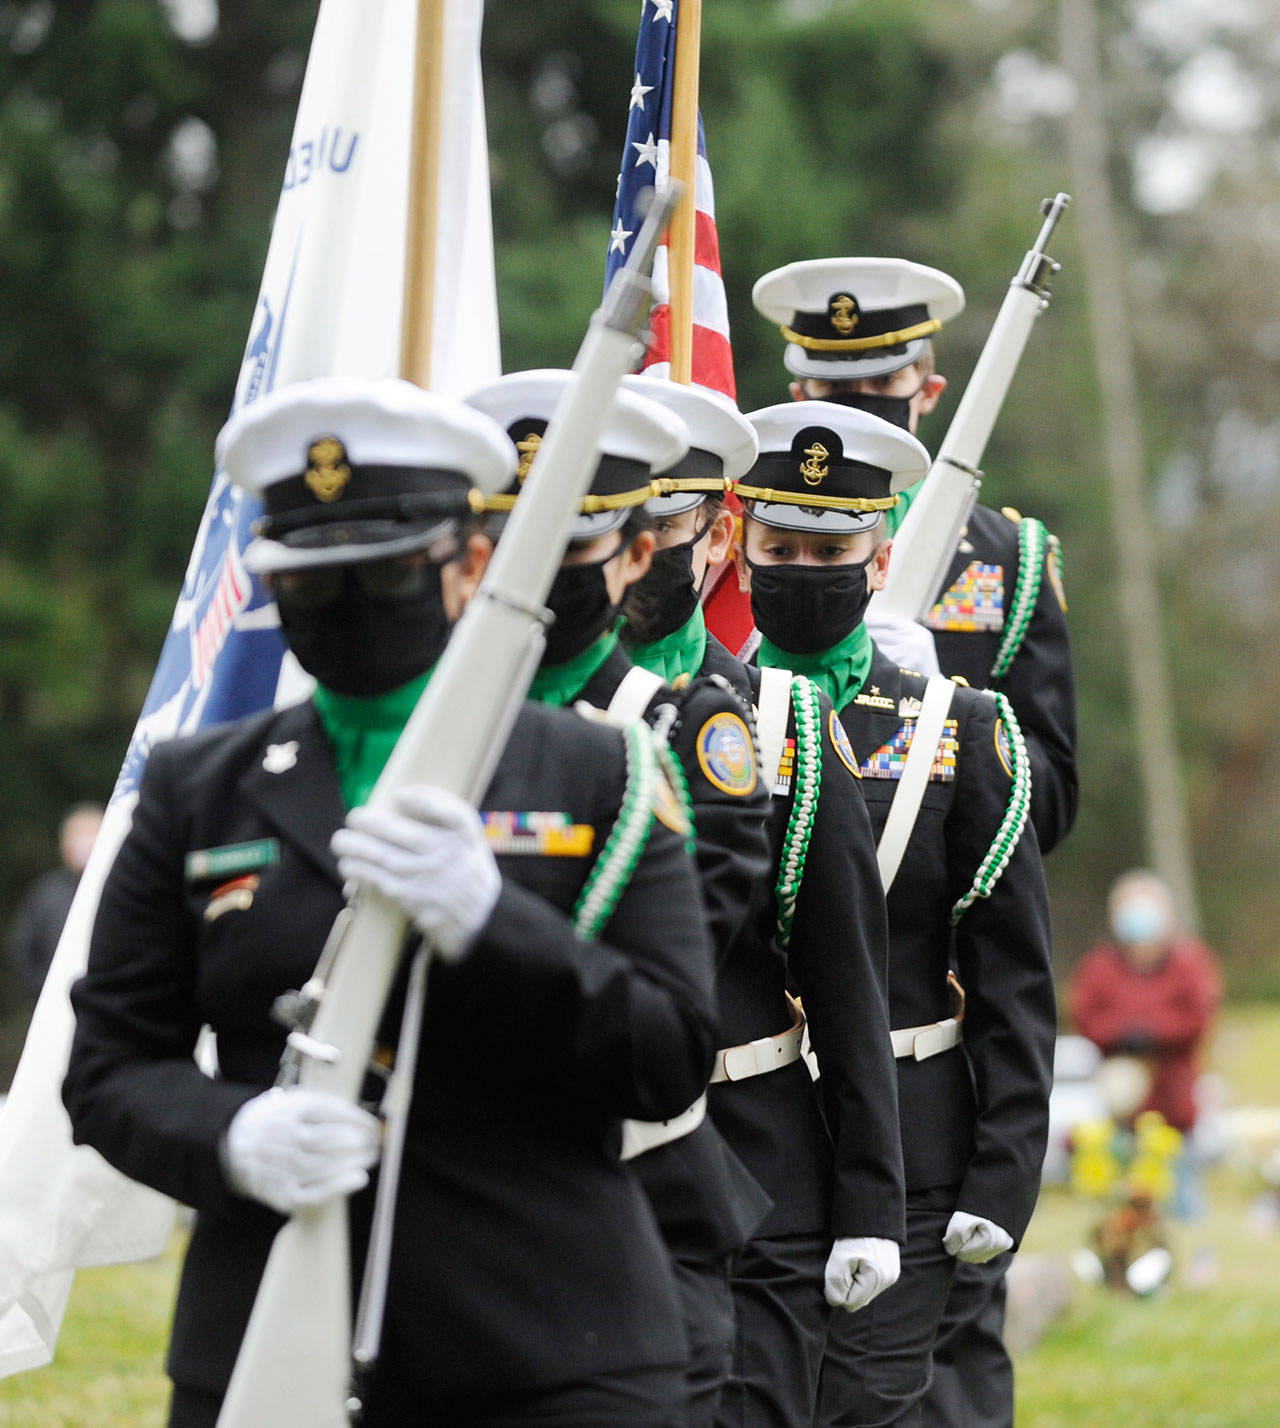 Members of the Port Angeles NJROTC program present the colors at the 2020 Sequim Wreaths Across America event on Dec. 19. (Michael Dashiell/Olympic Peninsula News Group)